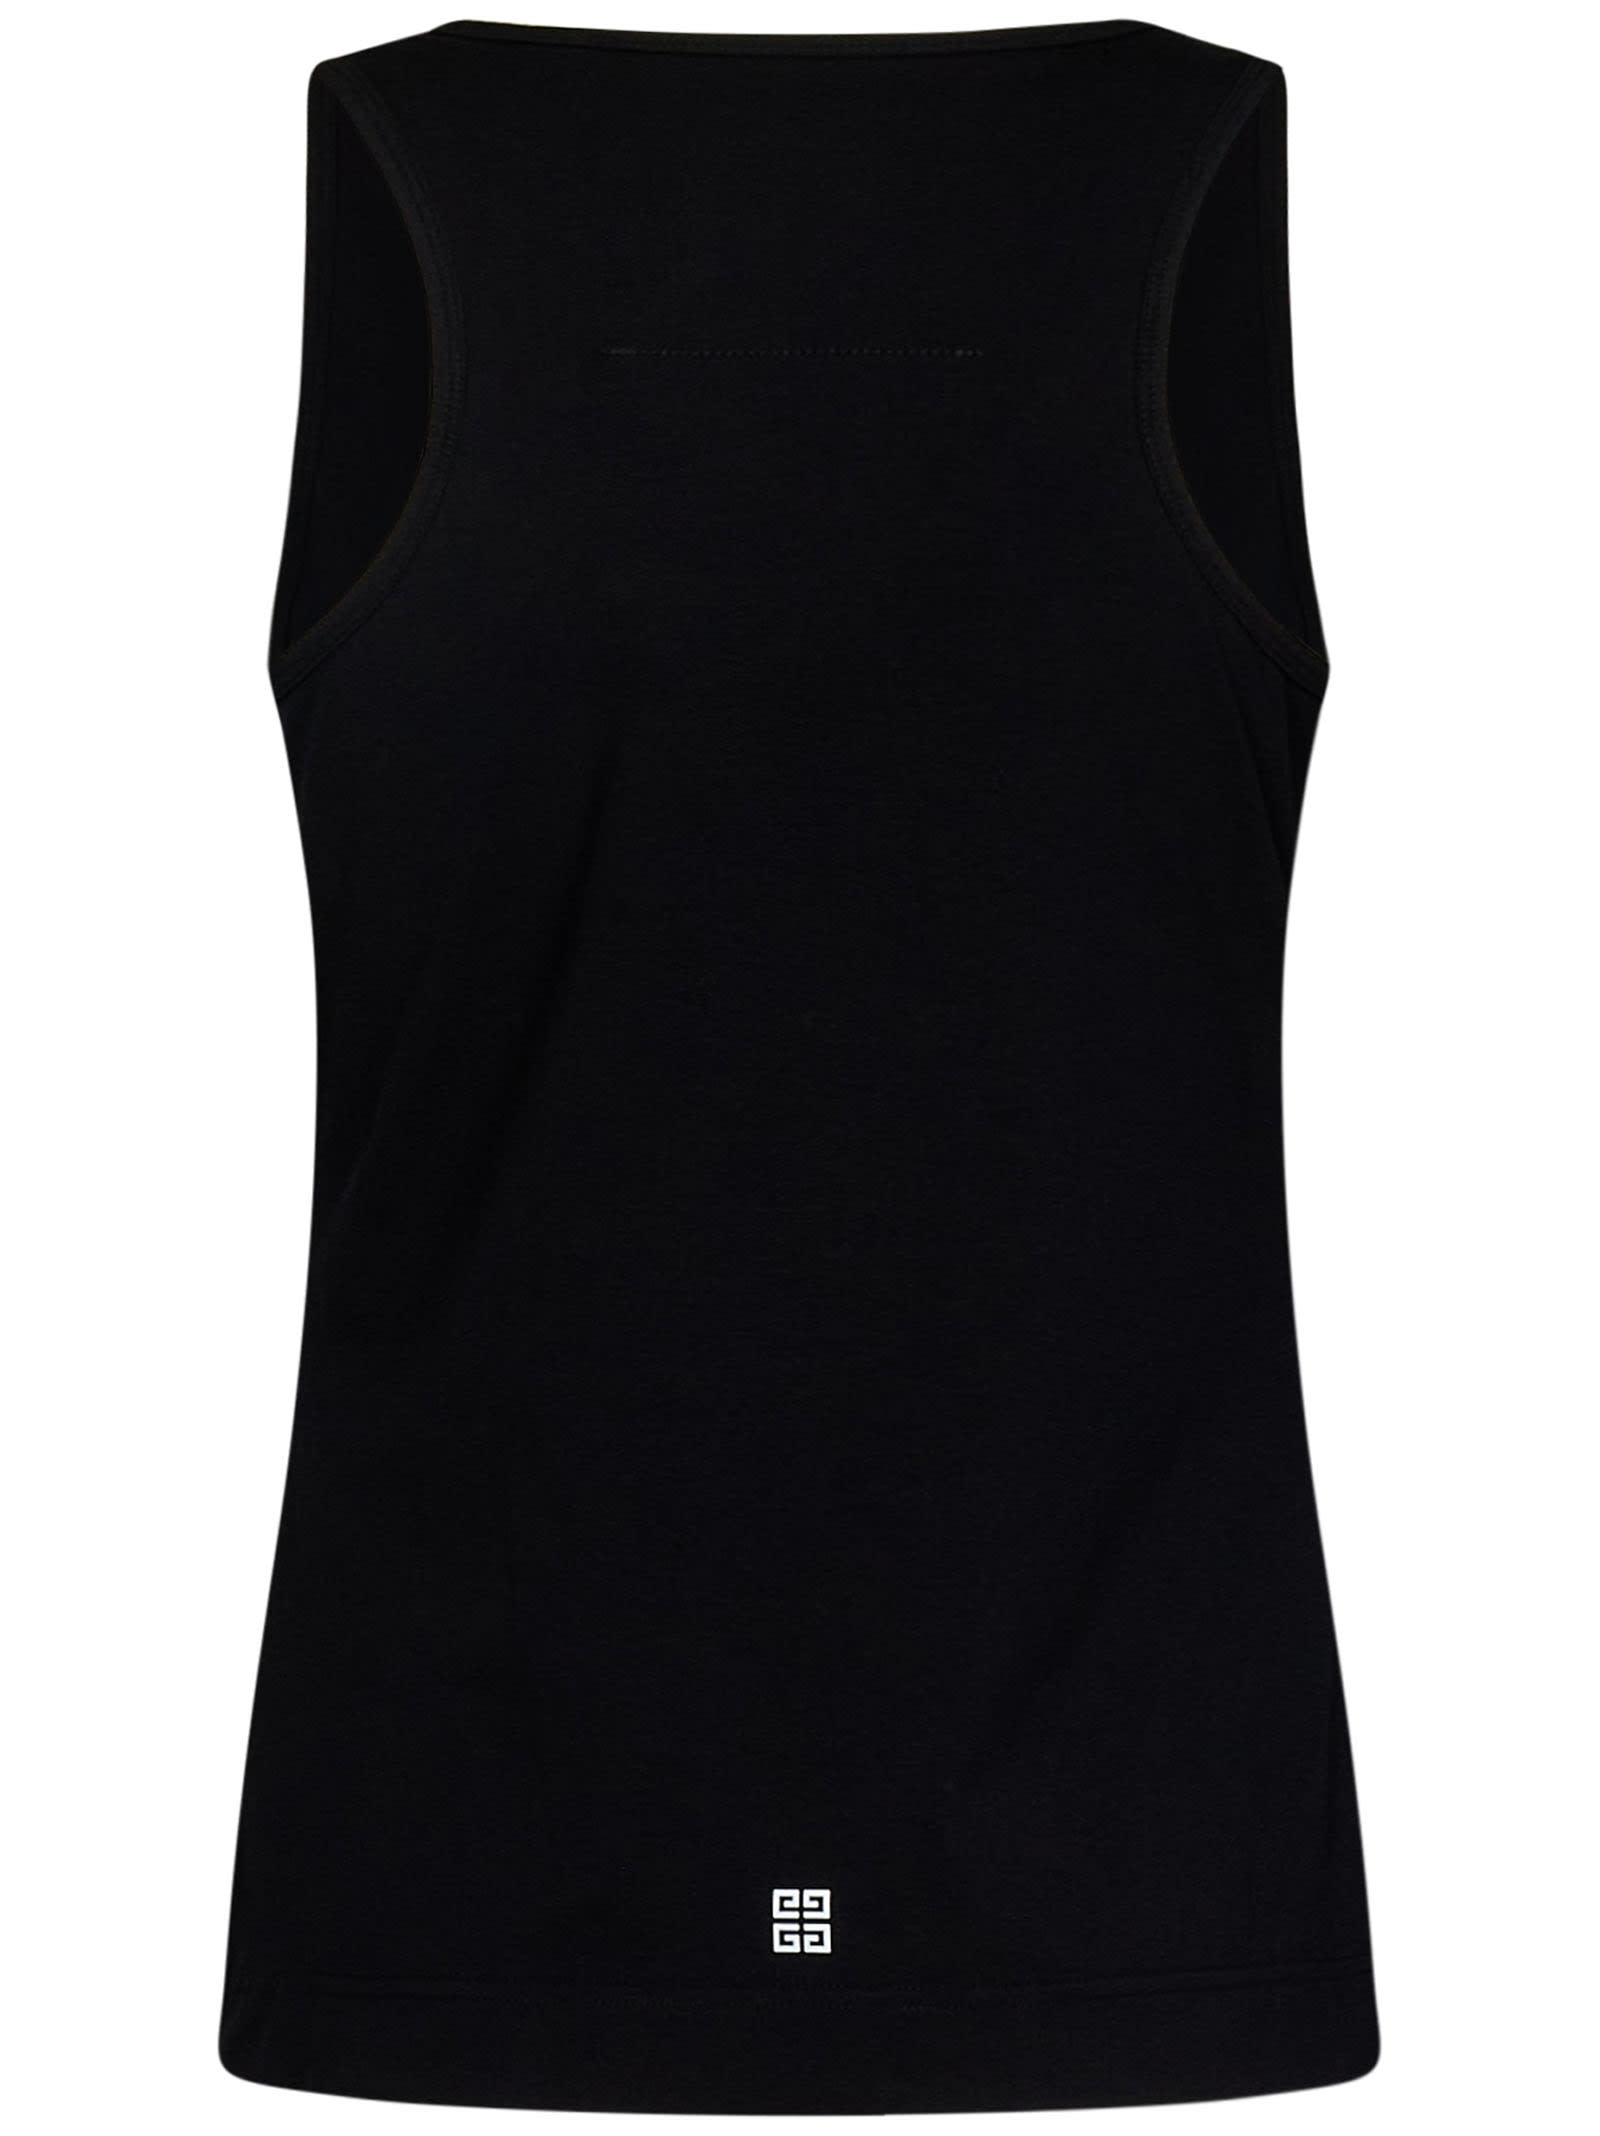 Shop Givenchy Archetype Tank Top In Black